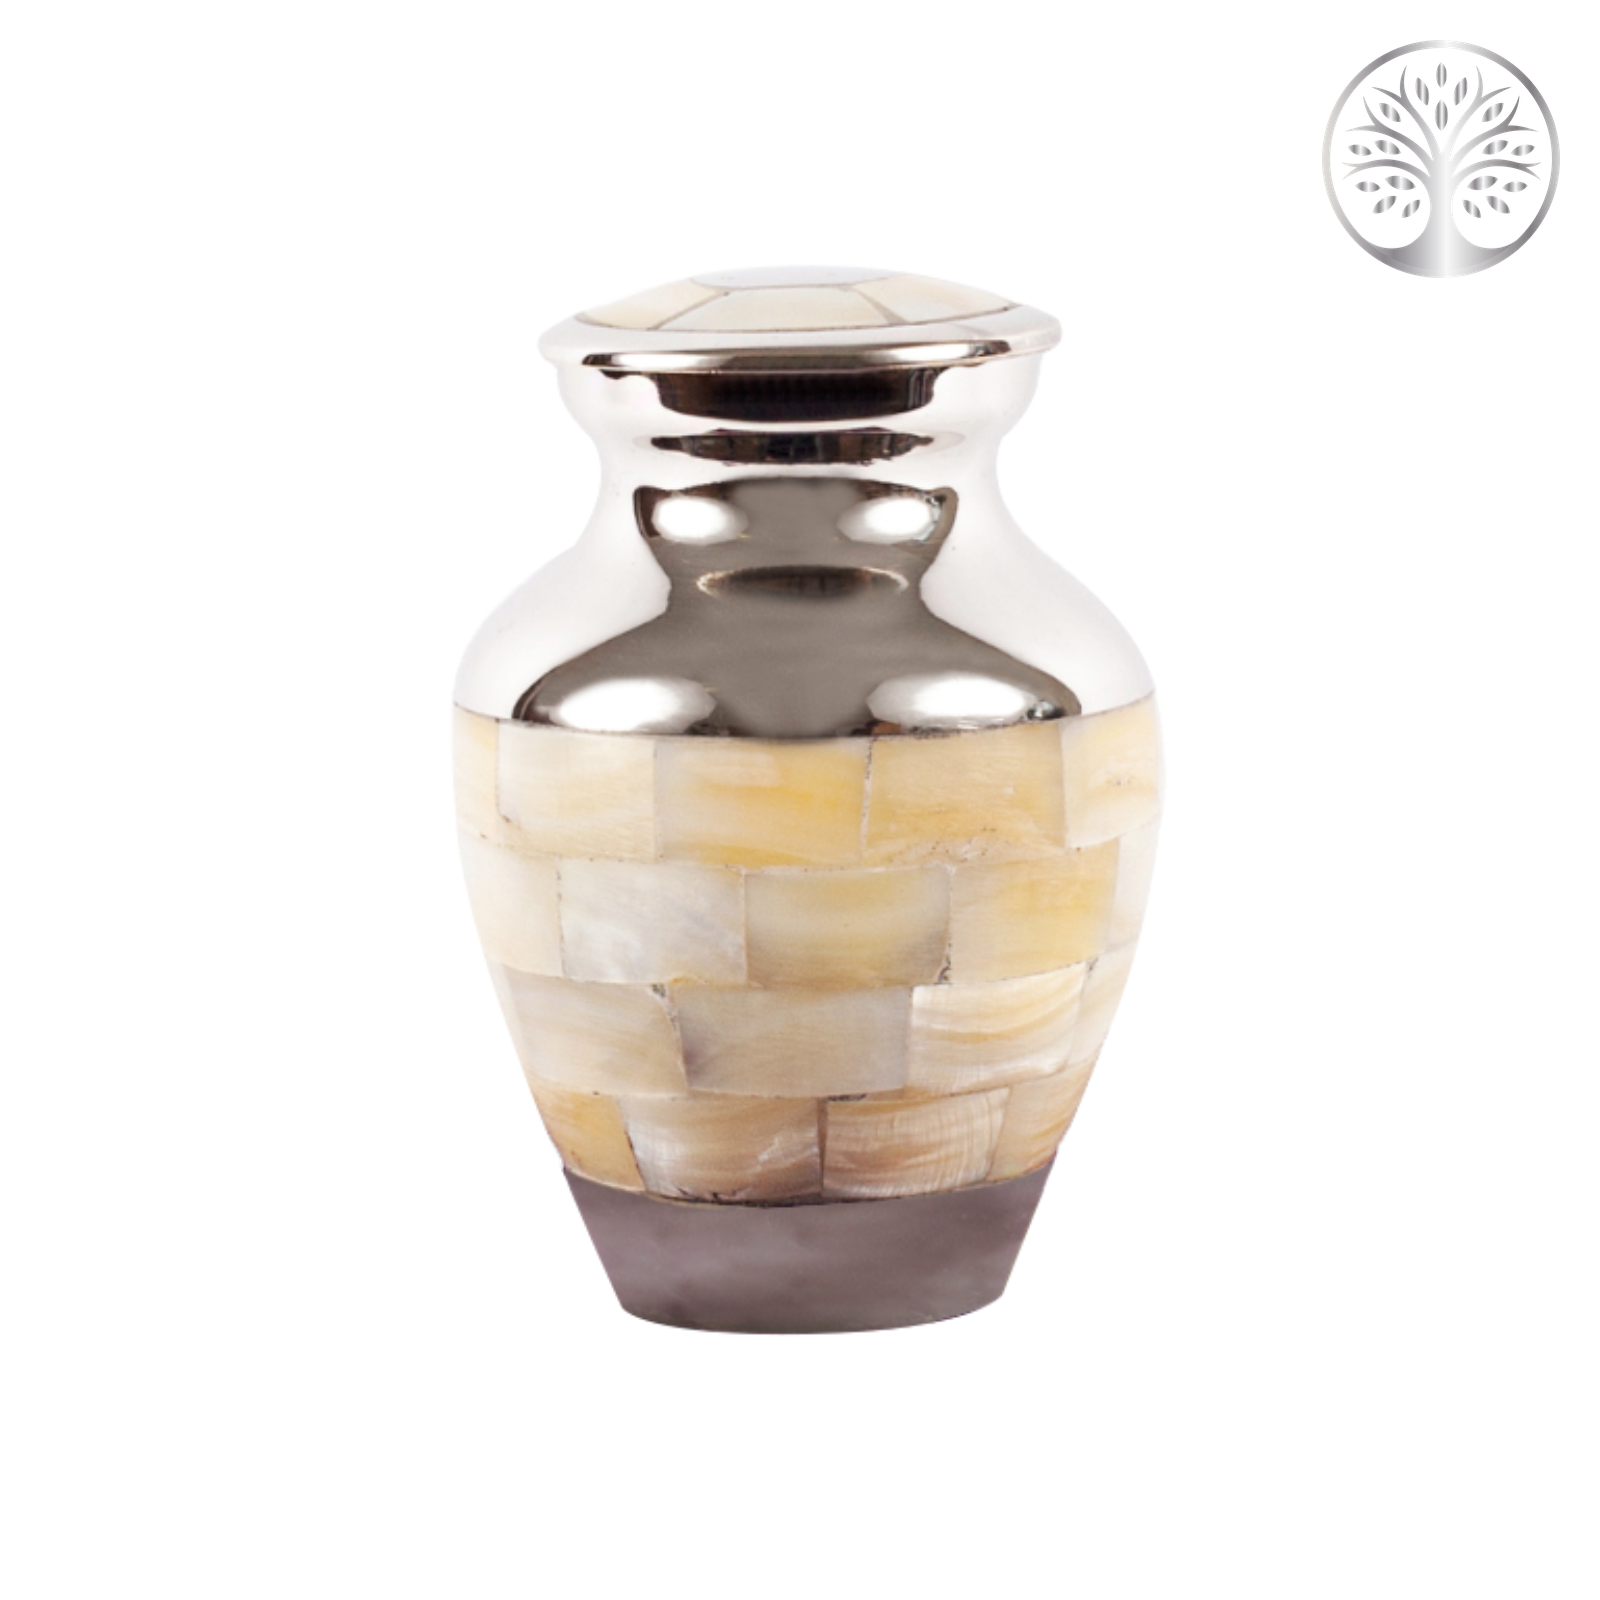 Silver and Mother of Pearl Keepsake Urn